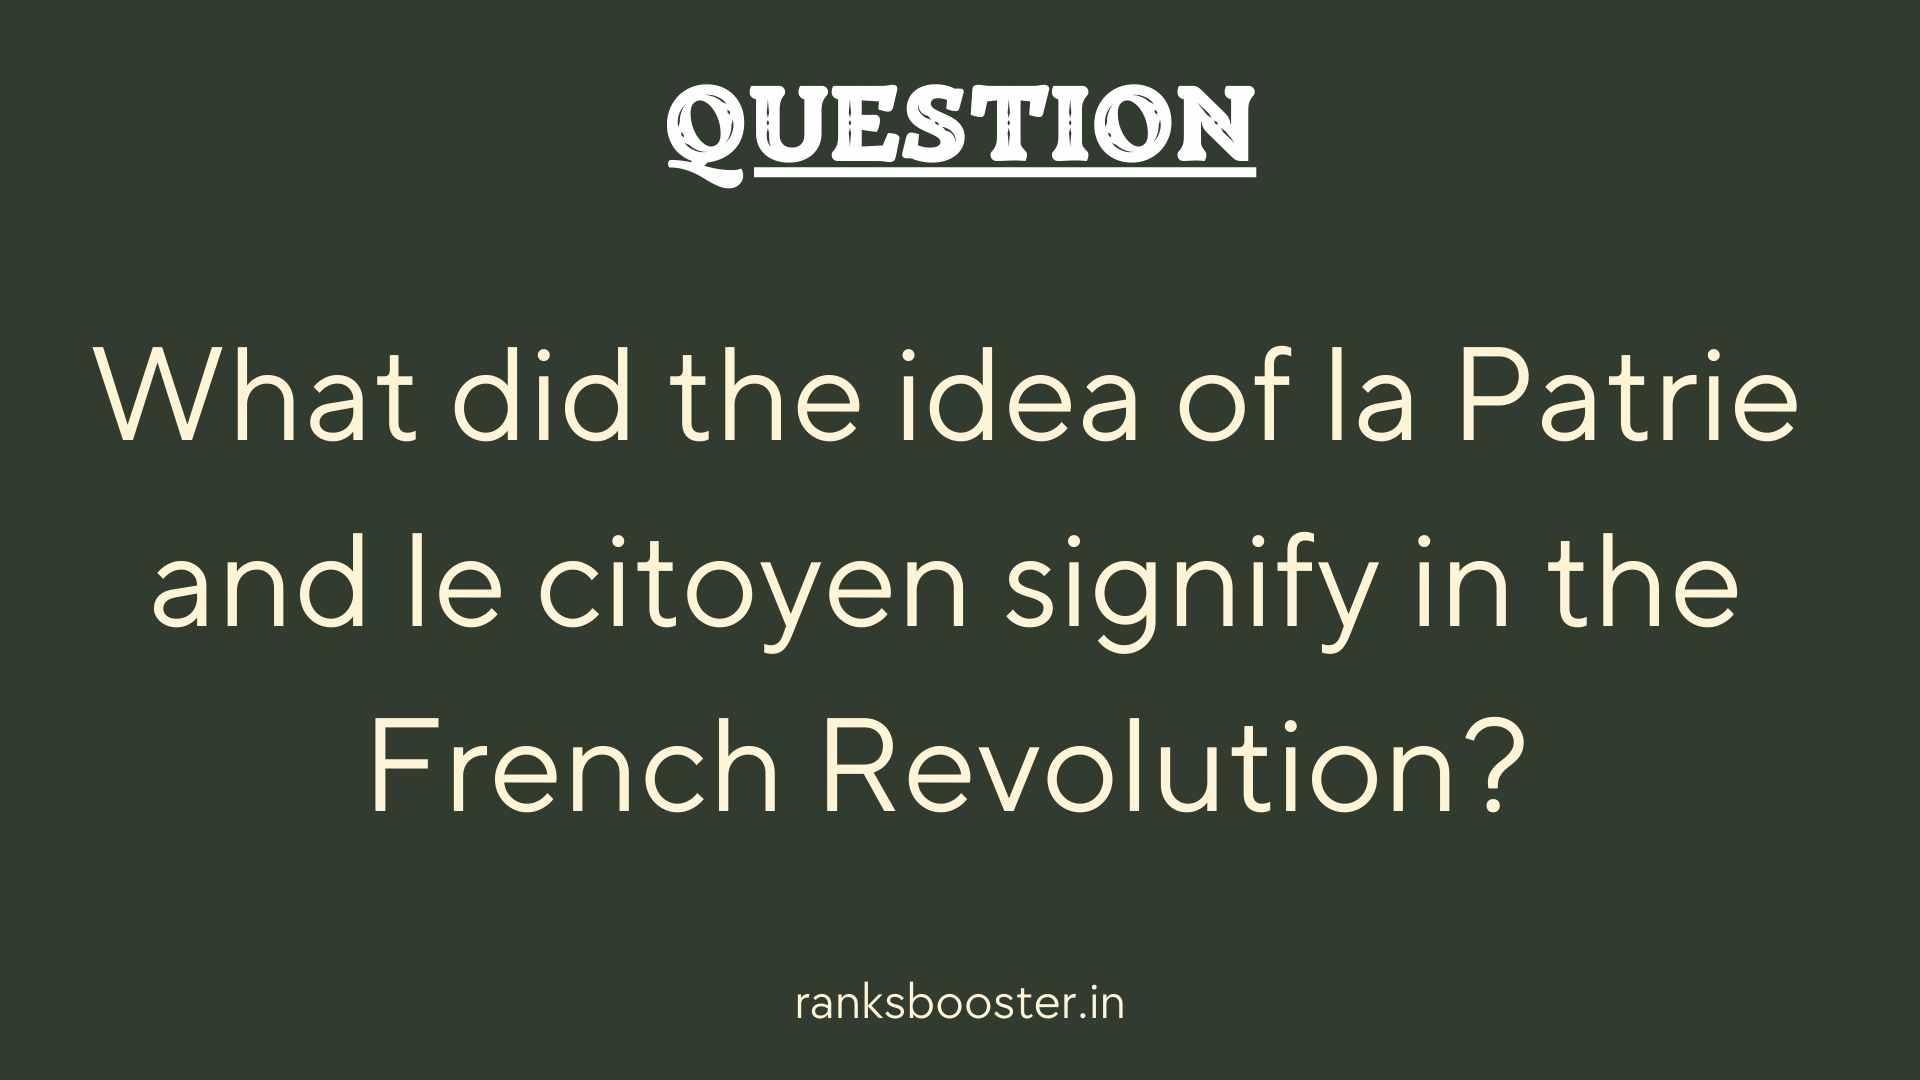 Question: What did the idea of la Patrie and le citoyen signify in the French Revolution?